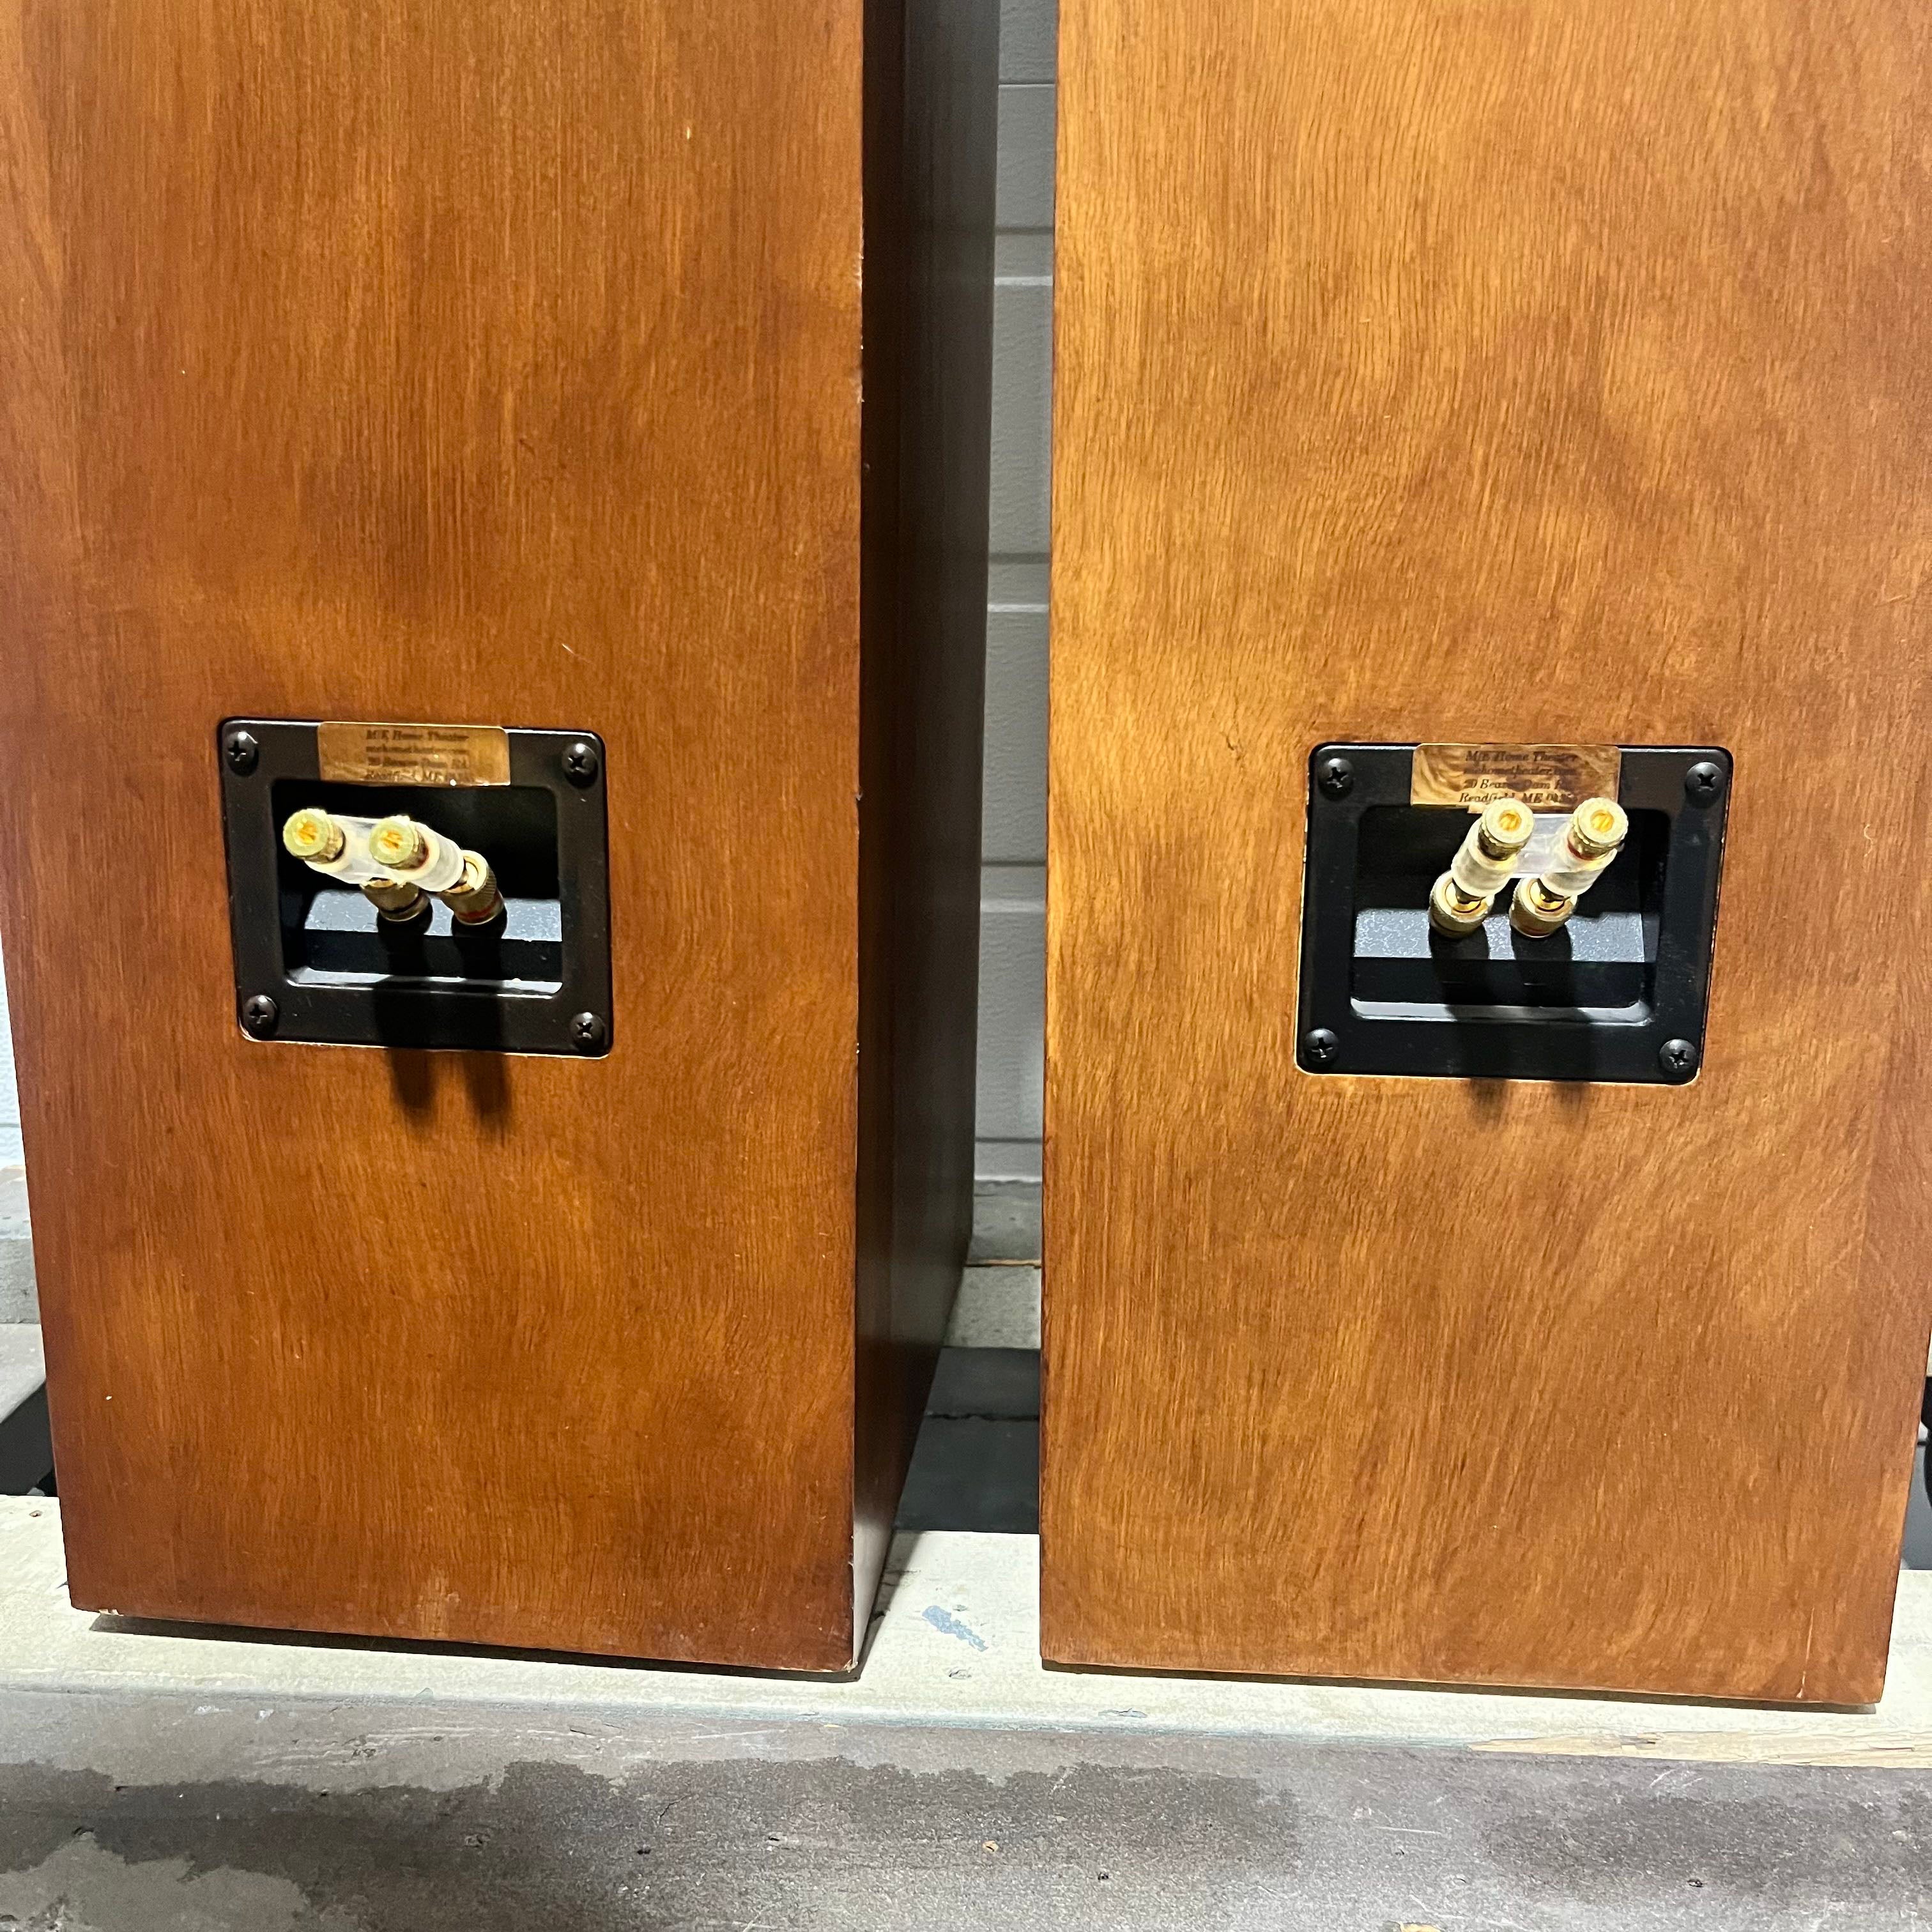 Set of 2 NEAR Tower Speakers